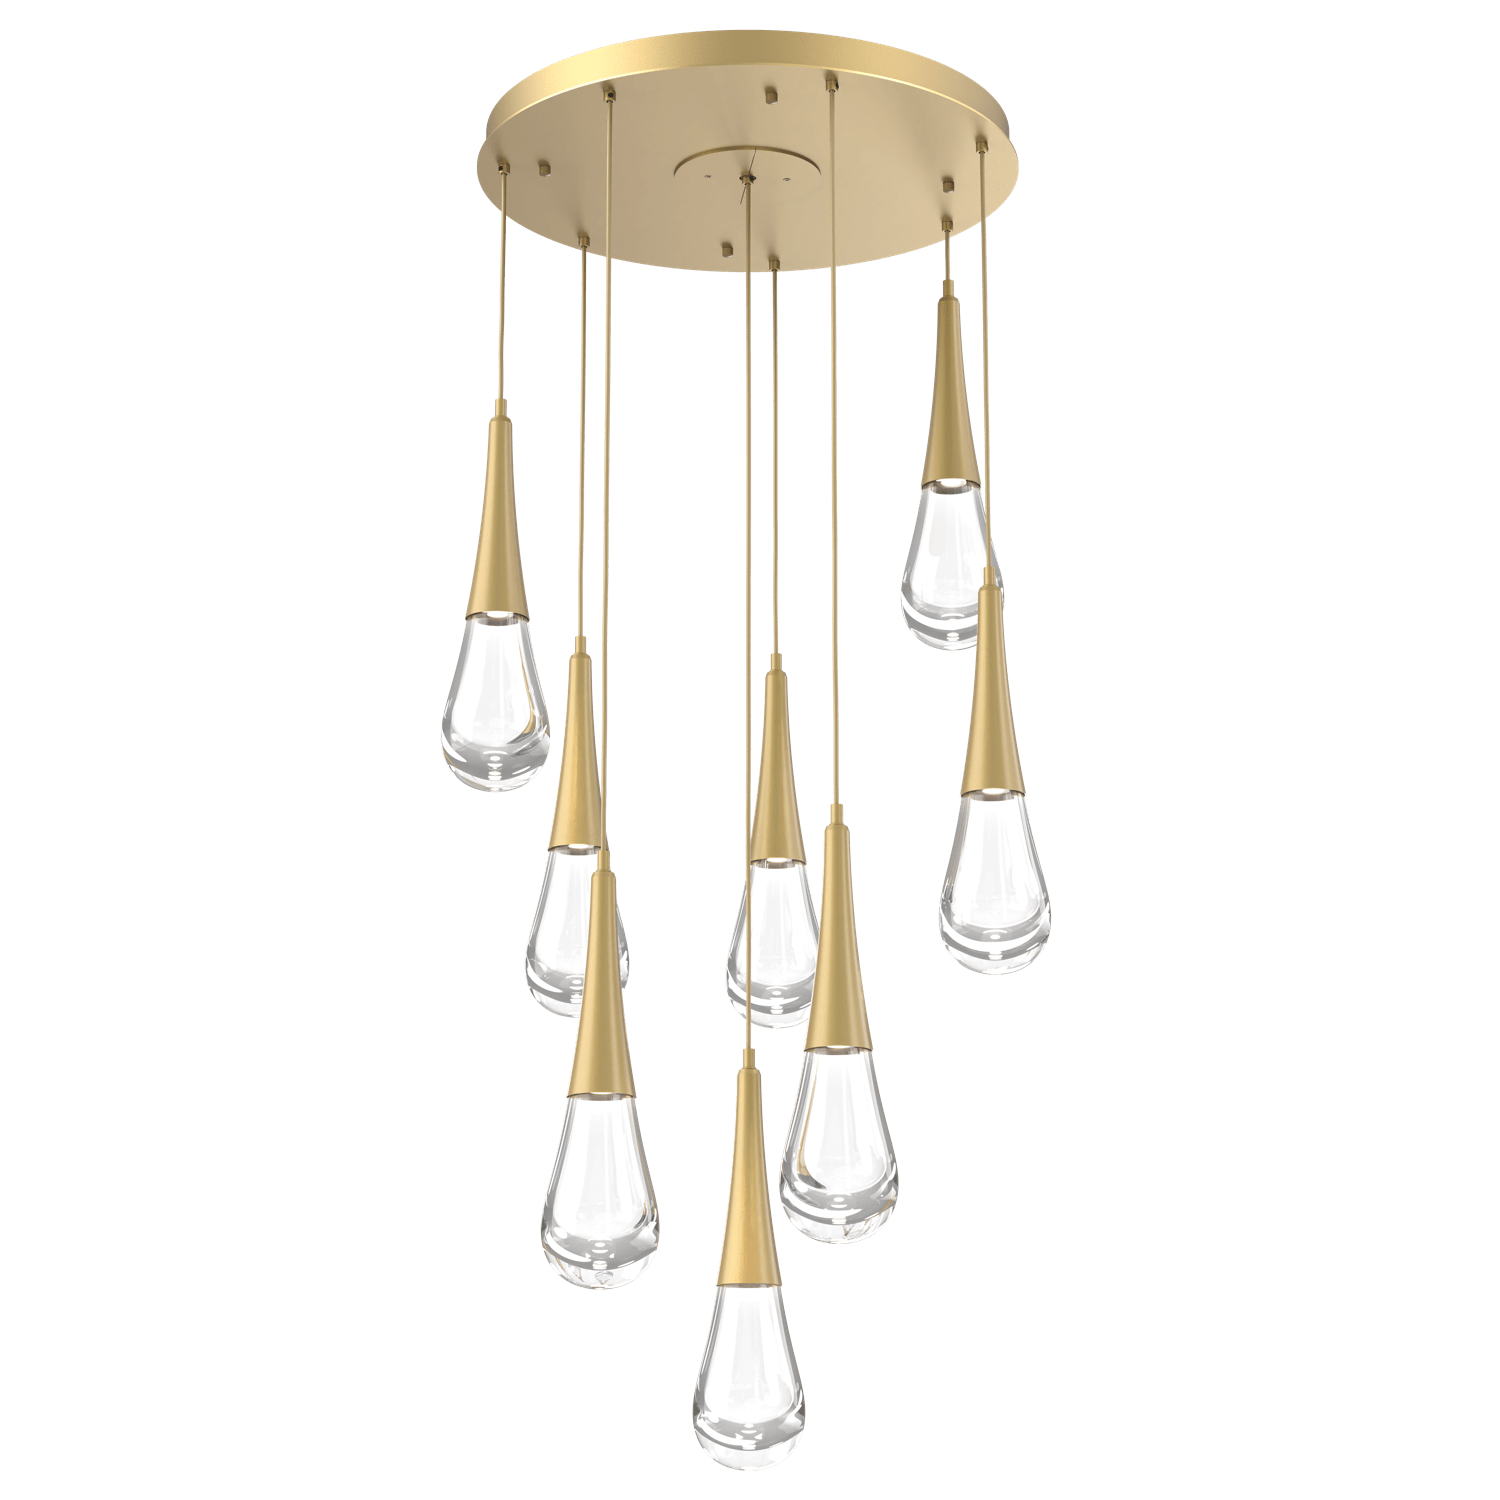 CHB0078-08-GB-Hammerton-Studio-Raindrop-8-light-round-pendant-chandelier-with-gilded-brass-finish-and-clear-blown-glass-shades-and-LED-lamping